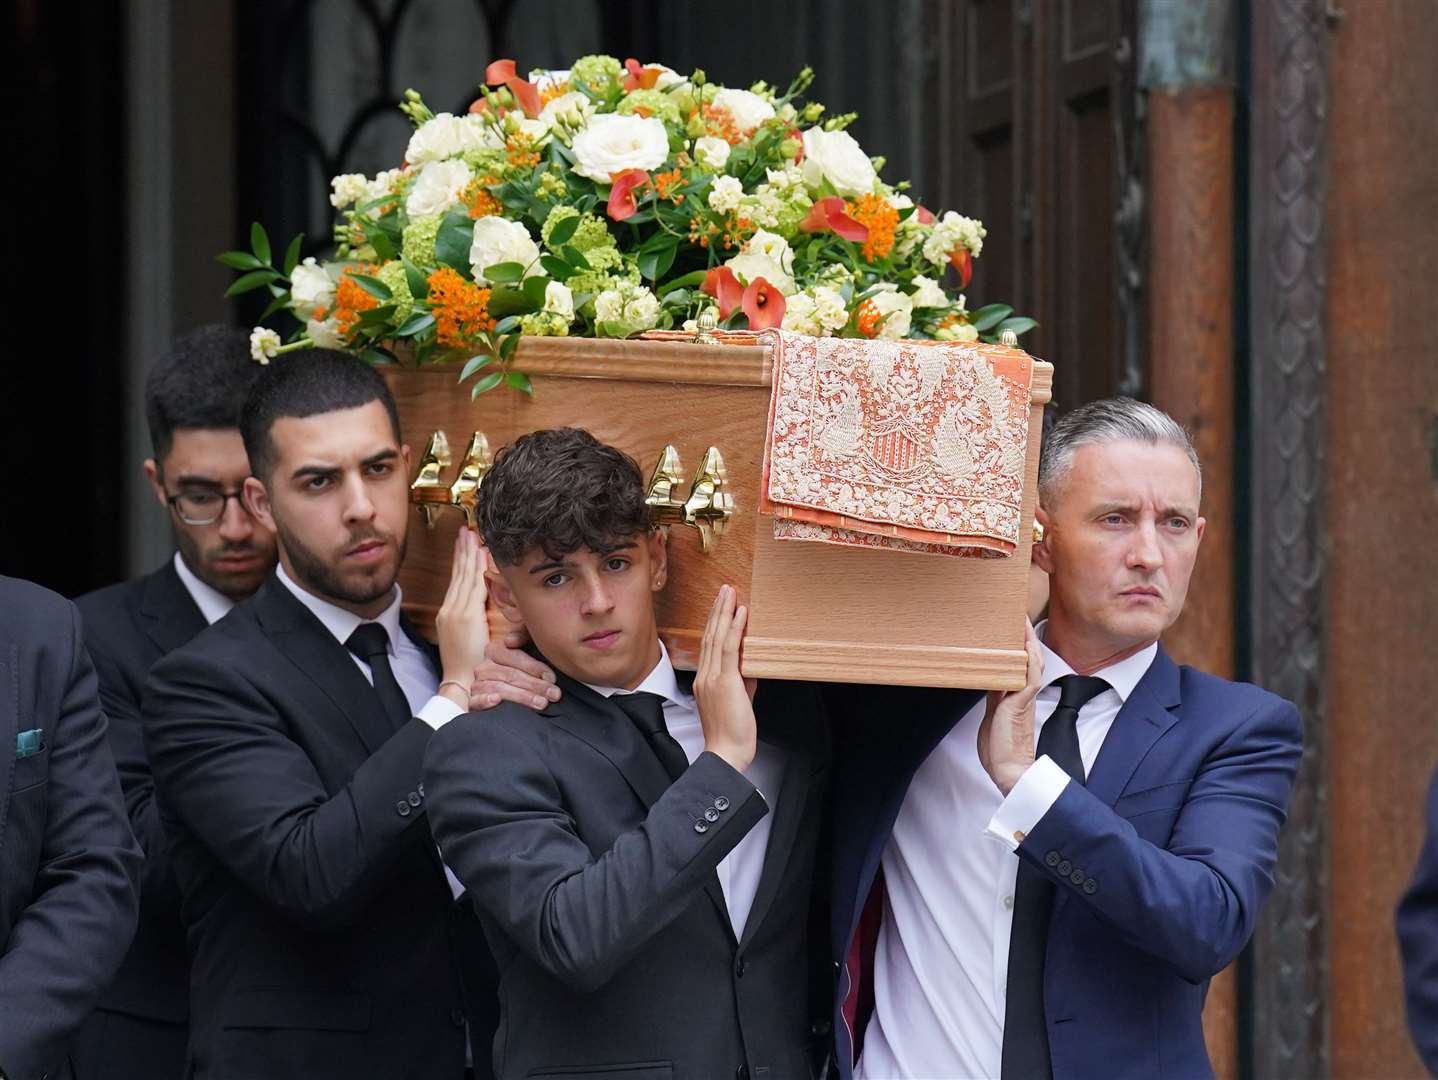 Grace O’Malley-Kumar’s coffin is carried from her funeral at Westminster Cathedral (Jonathan Brady/PA)